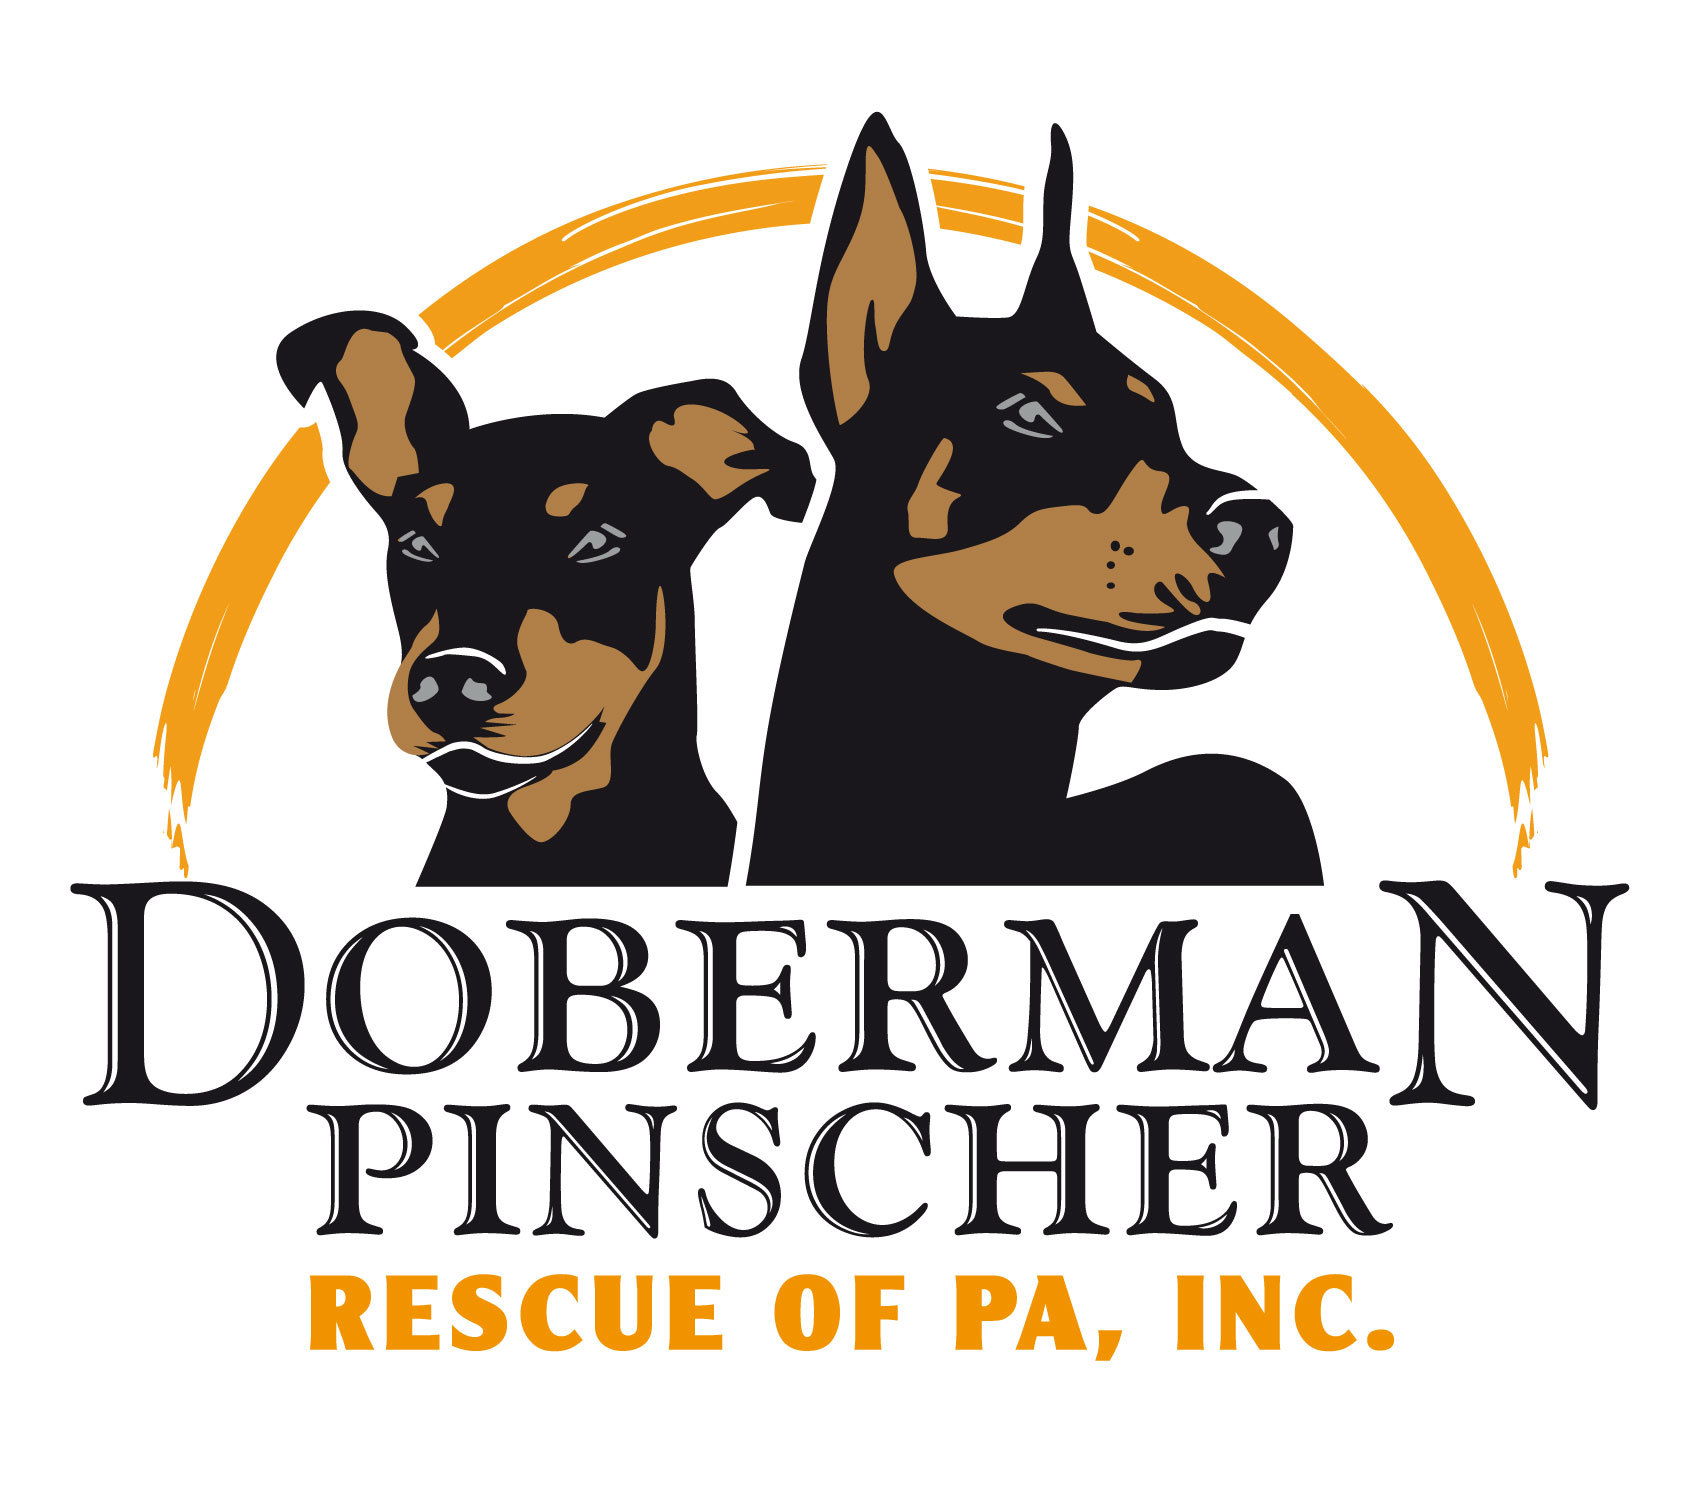 Get to know Doberman Pinscher Rescue of PA, Inc. 